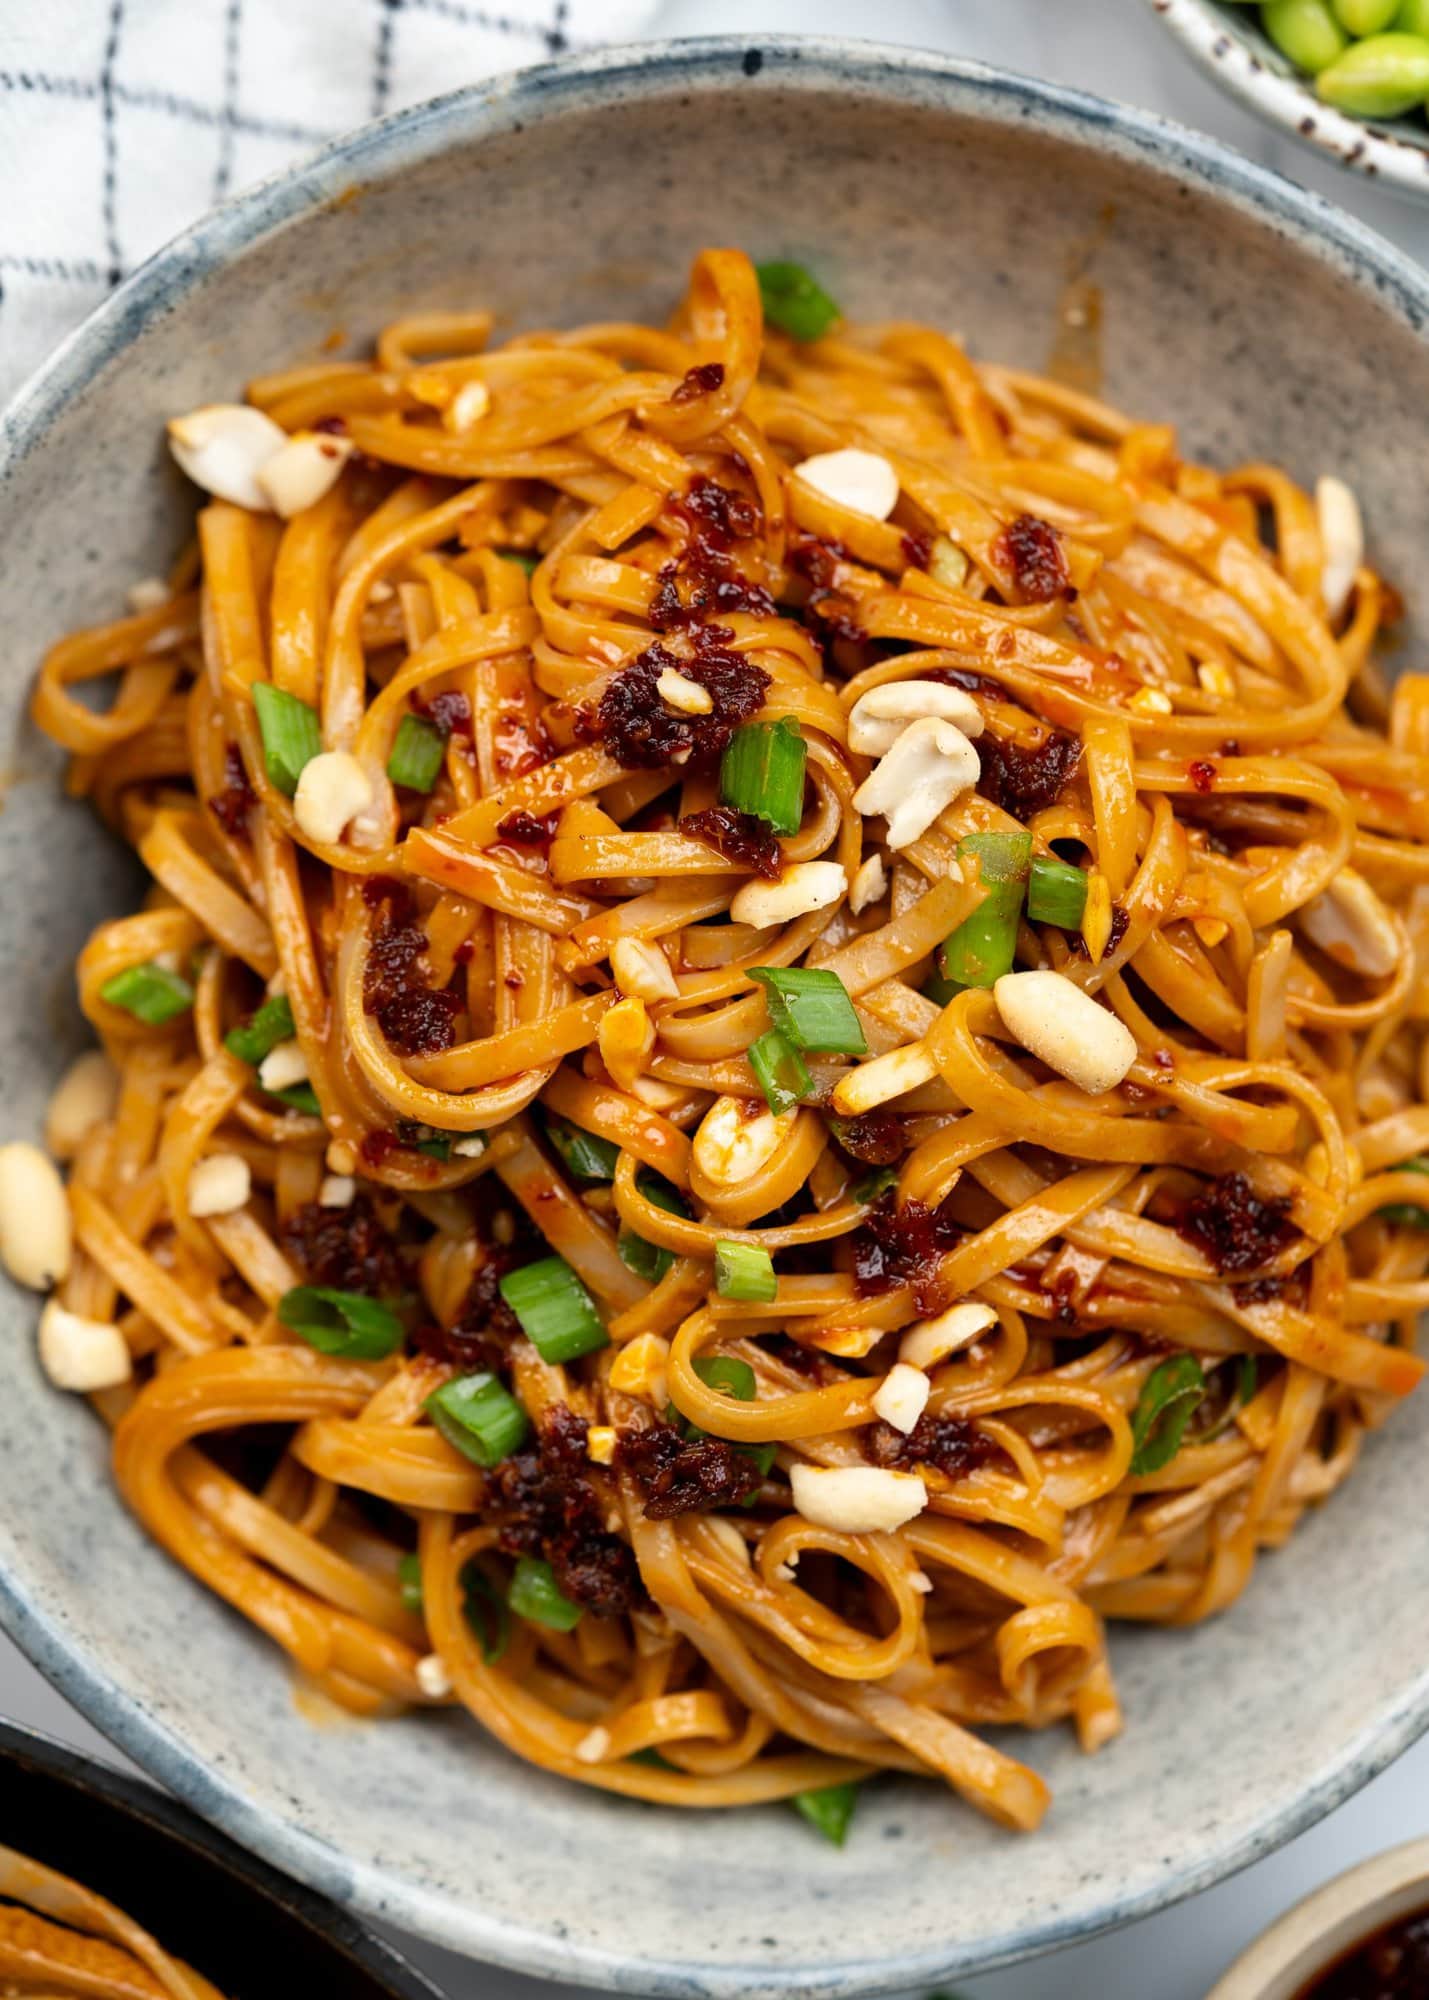 Rice noddles tossed in a creamy spicy peanut butter sauce and topped with crunchy peanut, green onions and chili crisp.